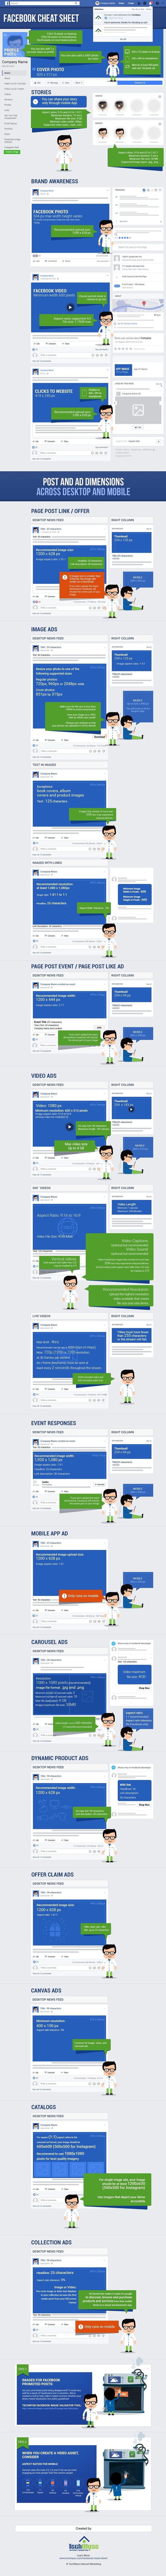 A Guide to Facebook Image Sizes and Dimensions 1